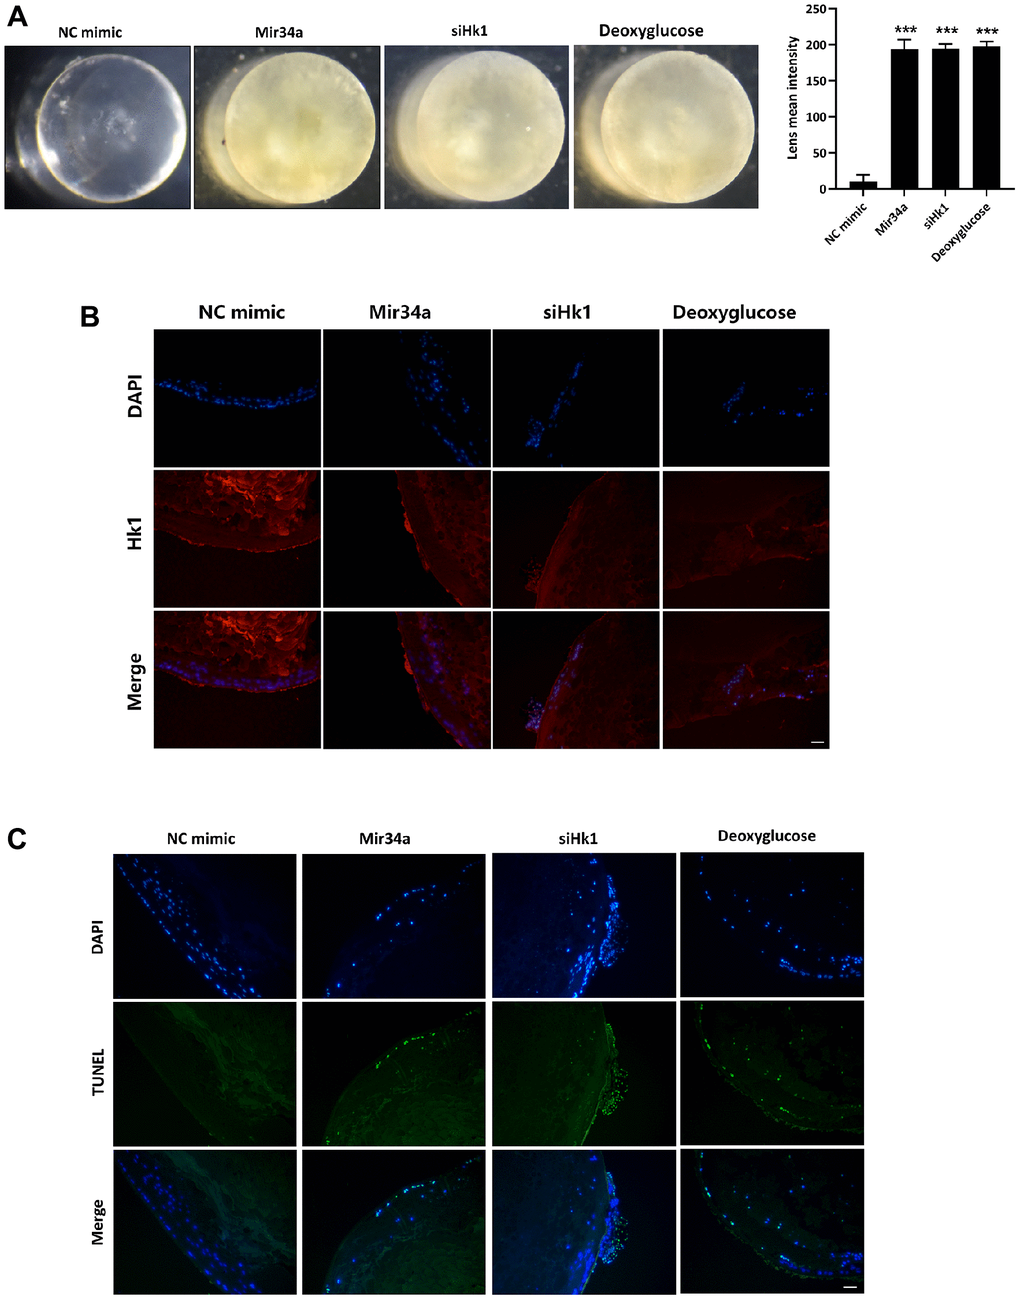 Mir34a modulates the opacification of the lens via the regulation of Hk1 expression. (A) The lens explant of the mouse was co-cultured with Mir34a, siHk1, or deoxyglucose, then the opacification of the lens was observed. (B) Lens explants of the mouse were performed as A, and Hk1 expression on lens epithelium was detected by immunofluorescence. Scale bars: 20 μm. (C) Lens explants of the mouse were performed as A, and the apoptosis of lens epithelium was detected by TUNEL. Scale bars: 20 μm. ***P 